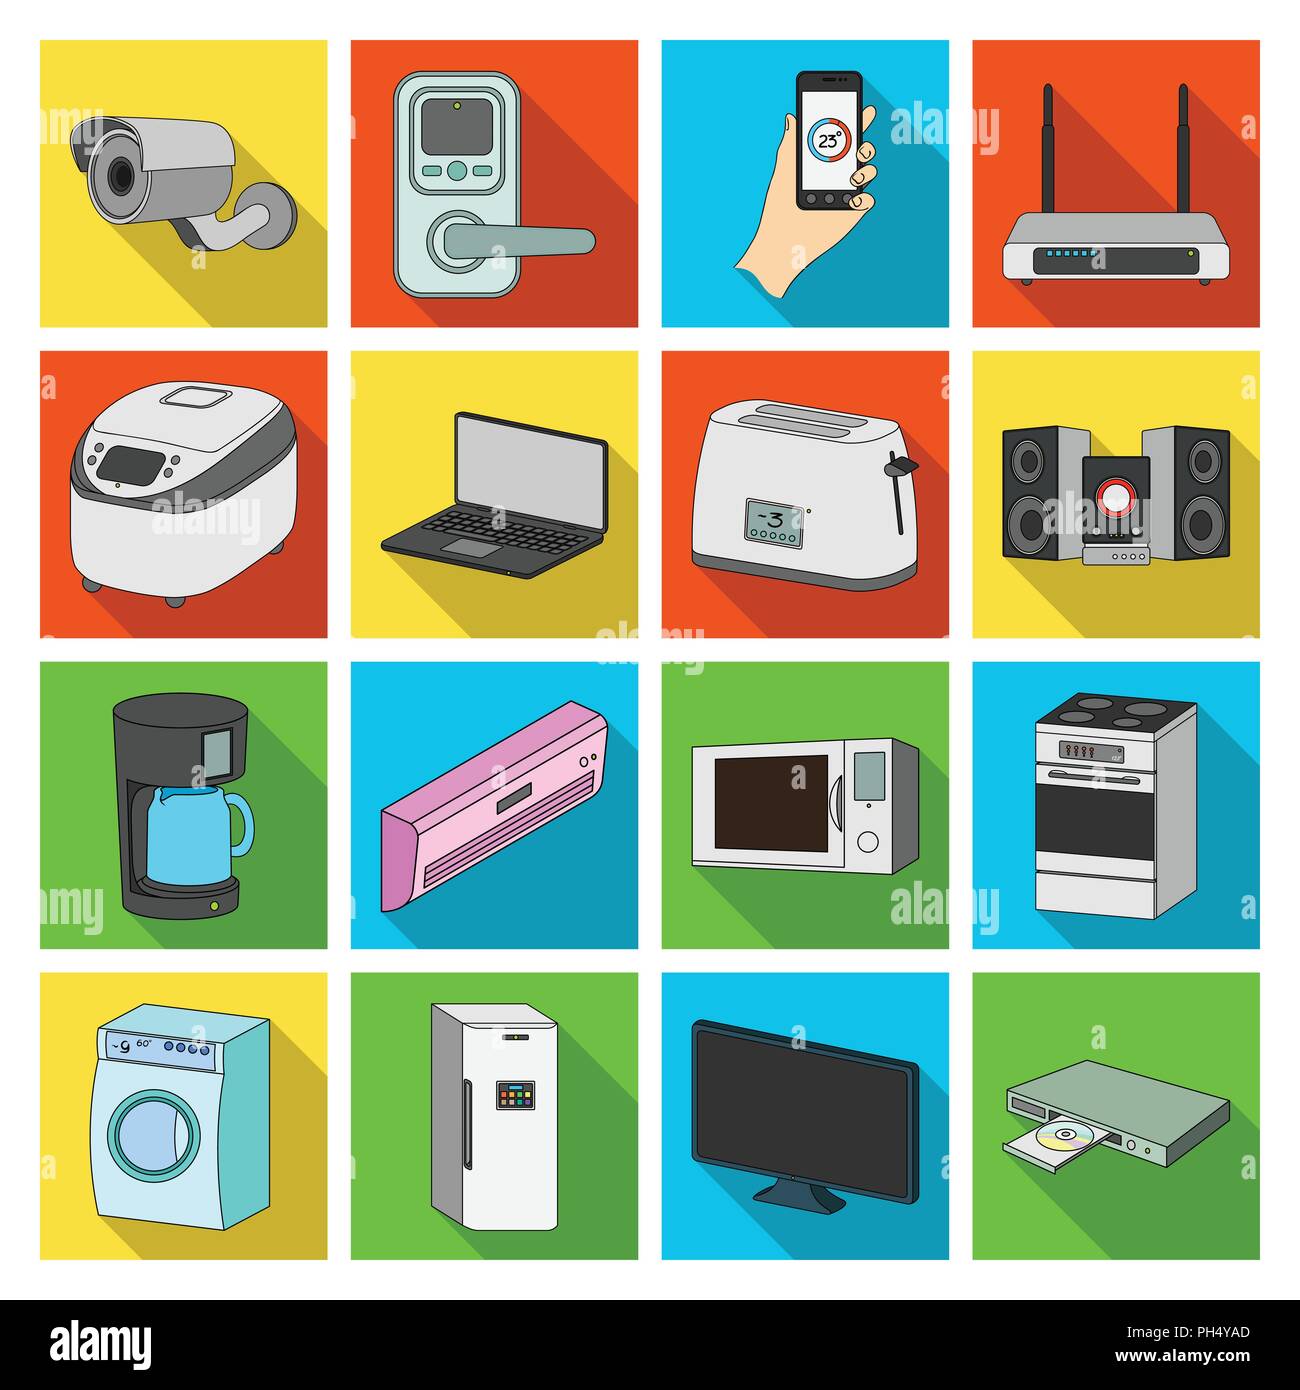 air,appliances,camera,center,coffee,collection,comfort,conditioning,disc,door,electric,electrical,engineering,equipment,flat,freezer,gas,hand,handle,home,household,icon,illustration,information,isolated,items,kitchen,laptop,life,machine,maker,microwave  ...